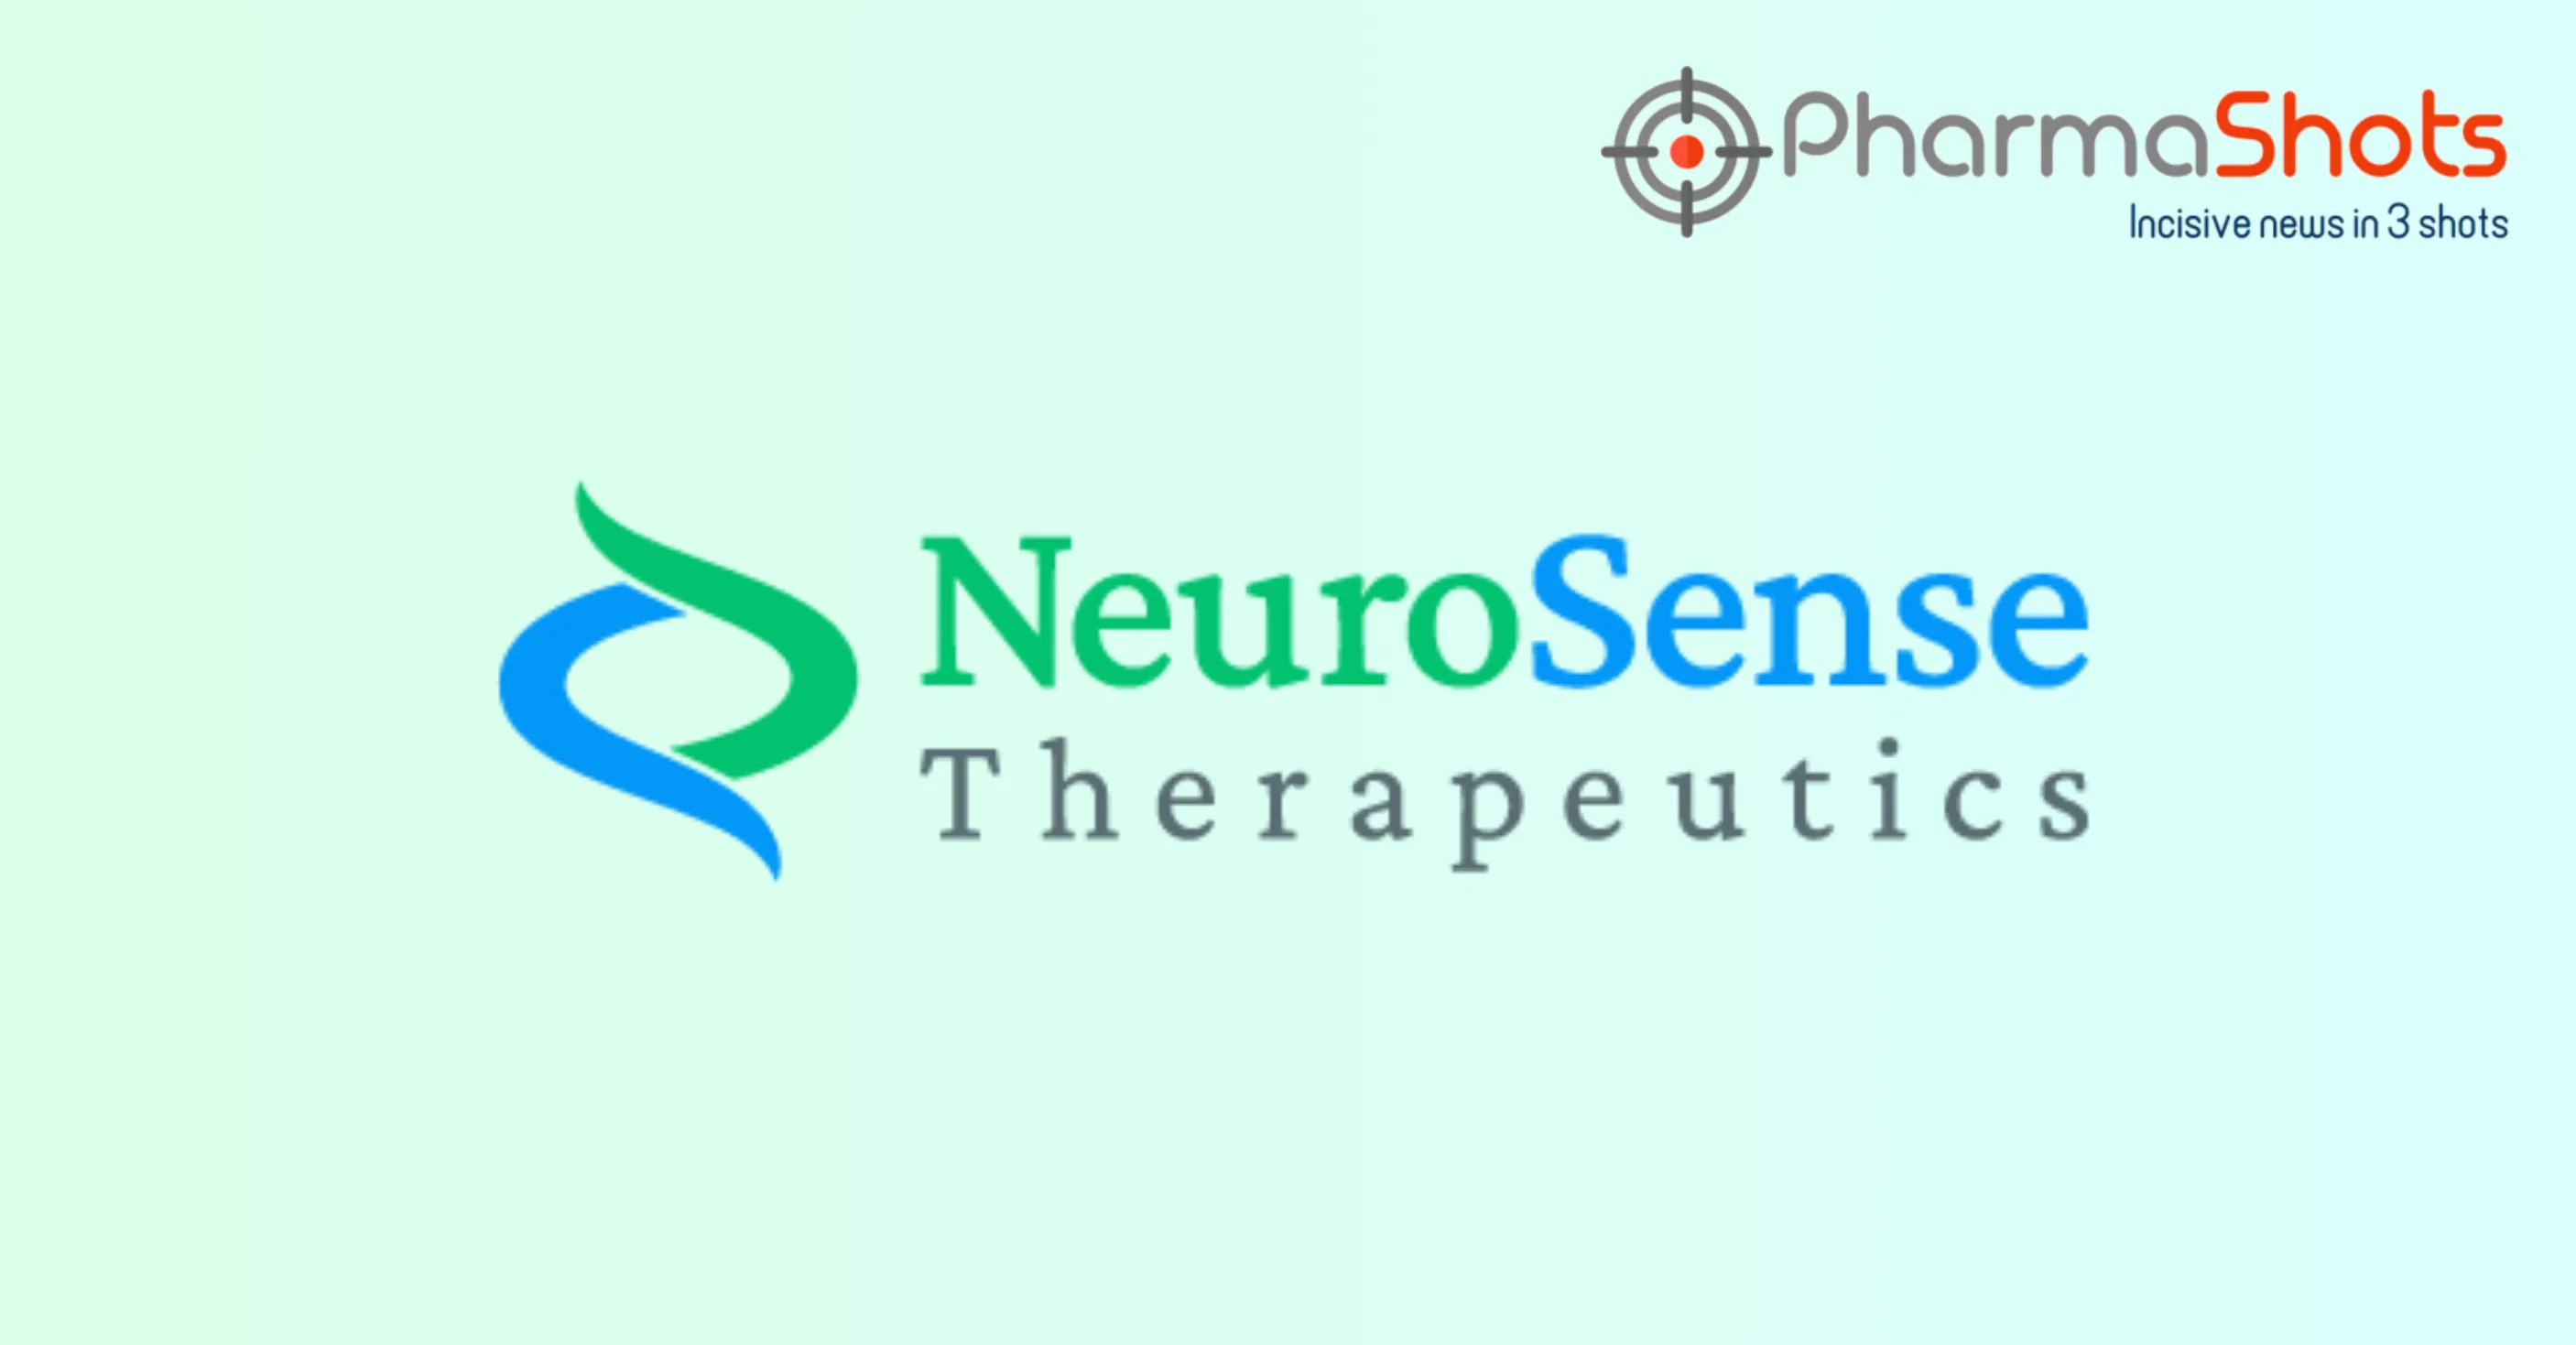 NeuroSense and Lonza Partner to Explore Exosome-based Biomarkers for the Diagnosis and Treatment of Neurodegenerative Disease